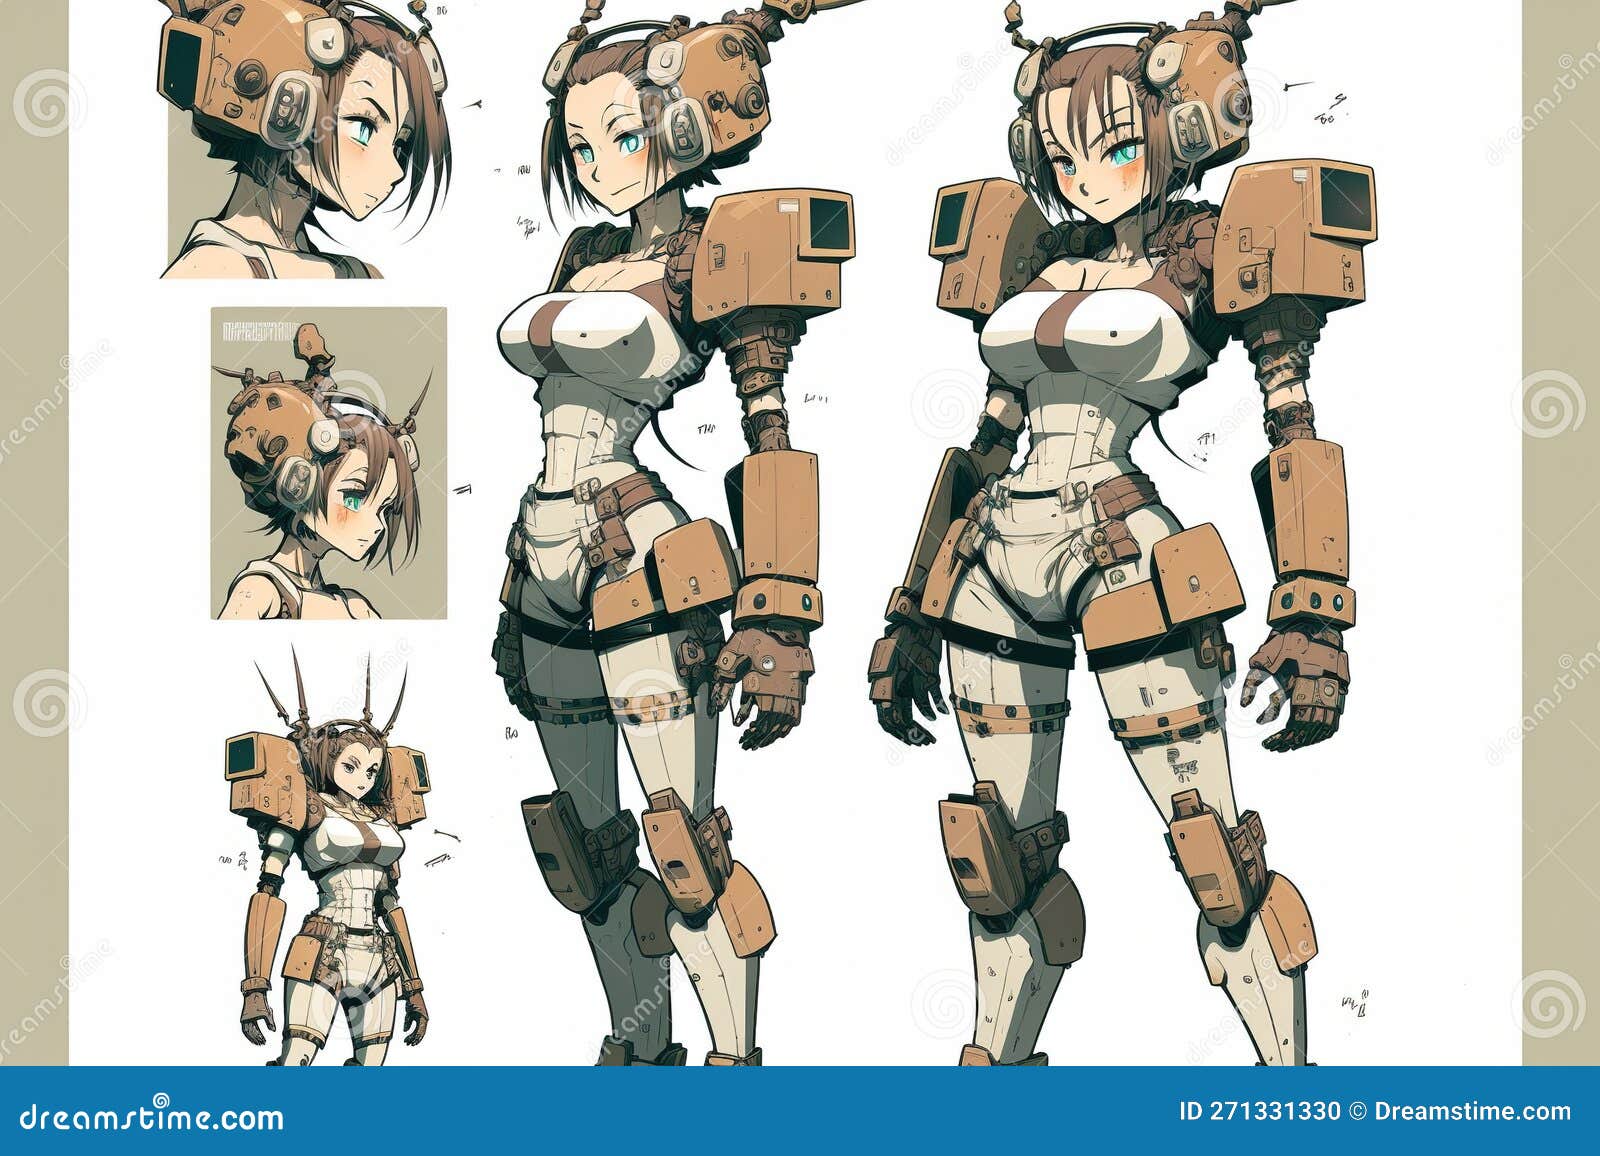 19 Must-See Anime Series With Giant Robots – CatchCostume